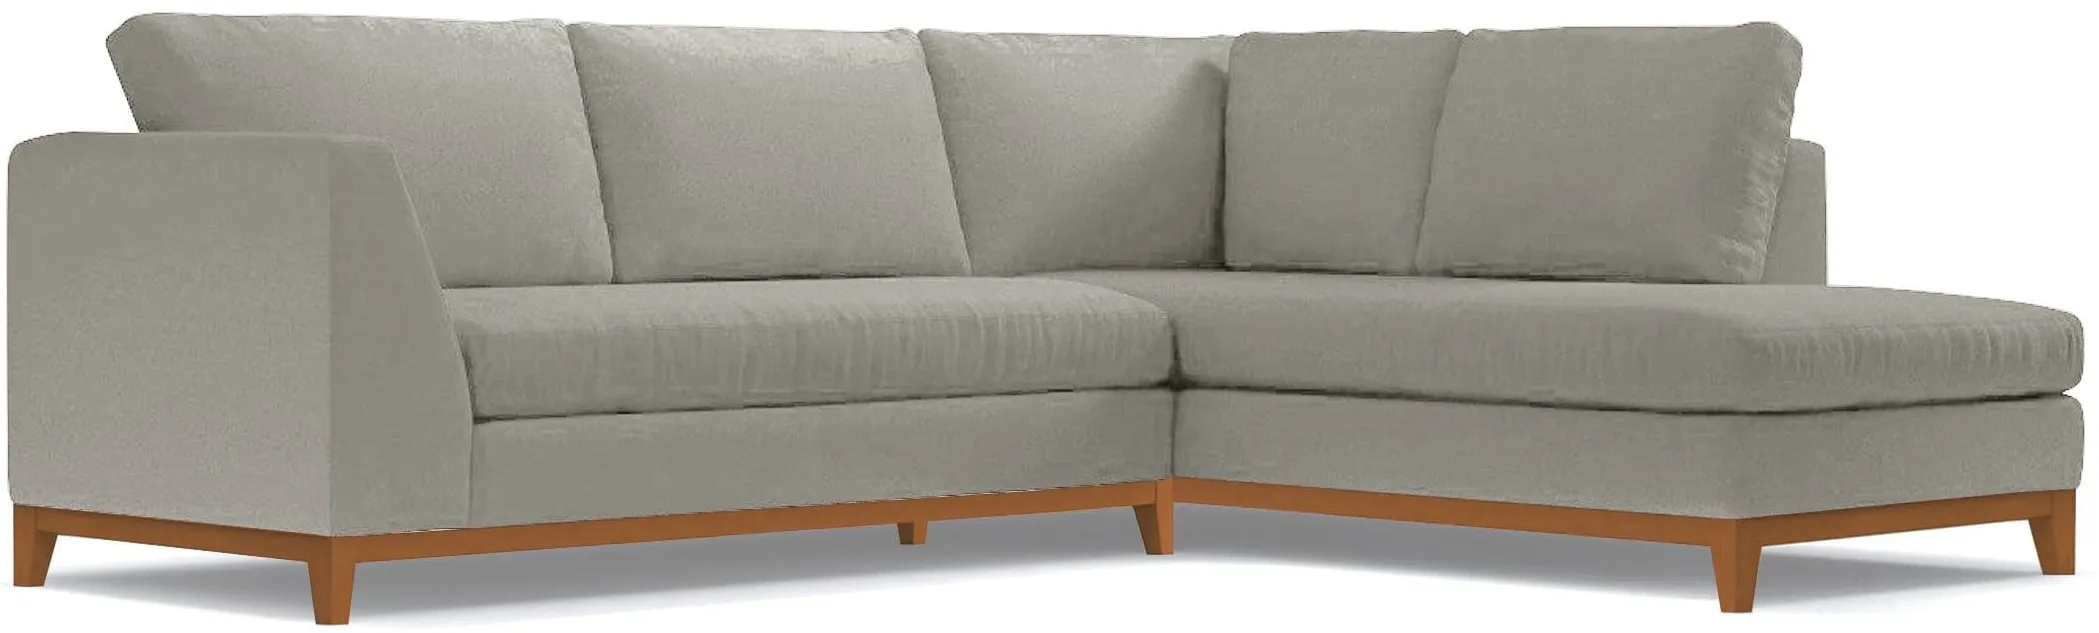 Mulholland Drive 2pc Sectional Sofa